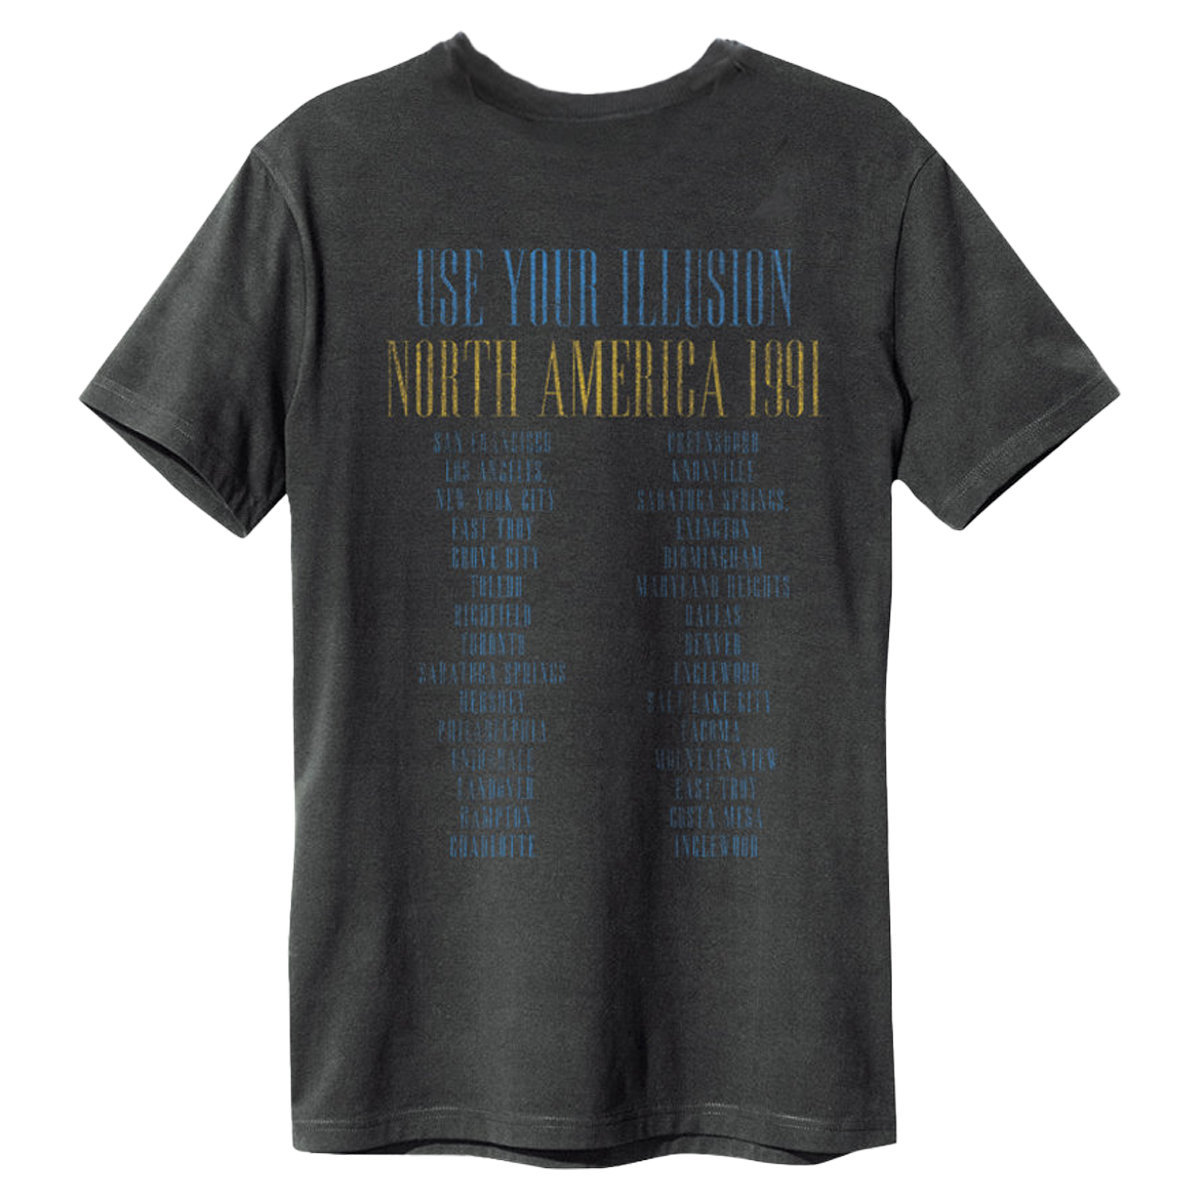 GUNS N ROSES USE YOUR ILLUSION TOUR 1991 NORTH AMERICA